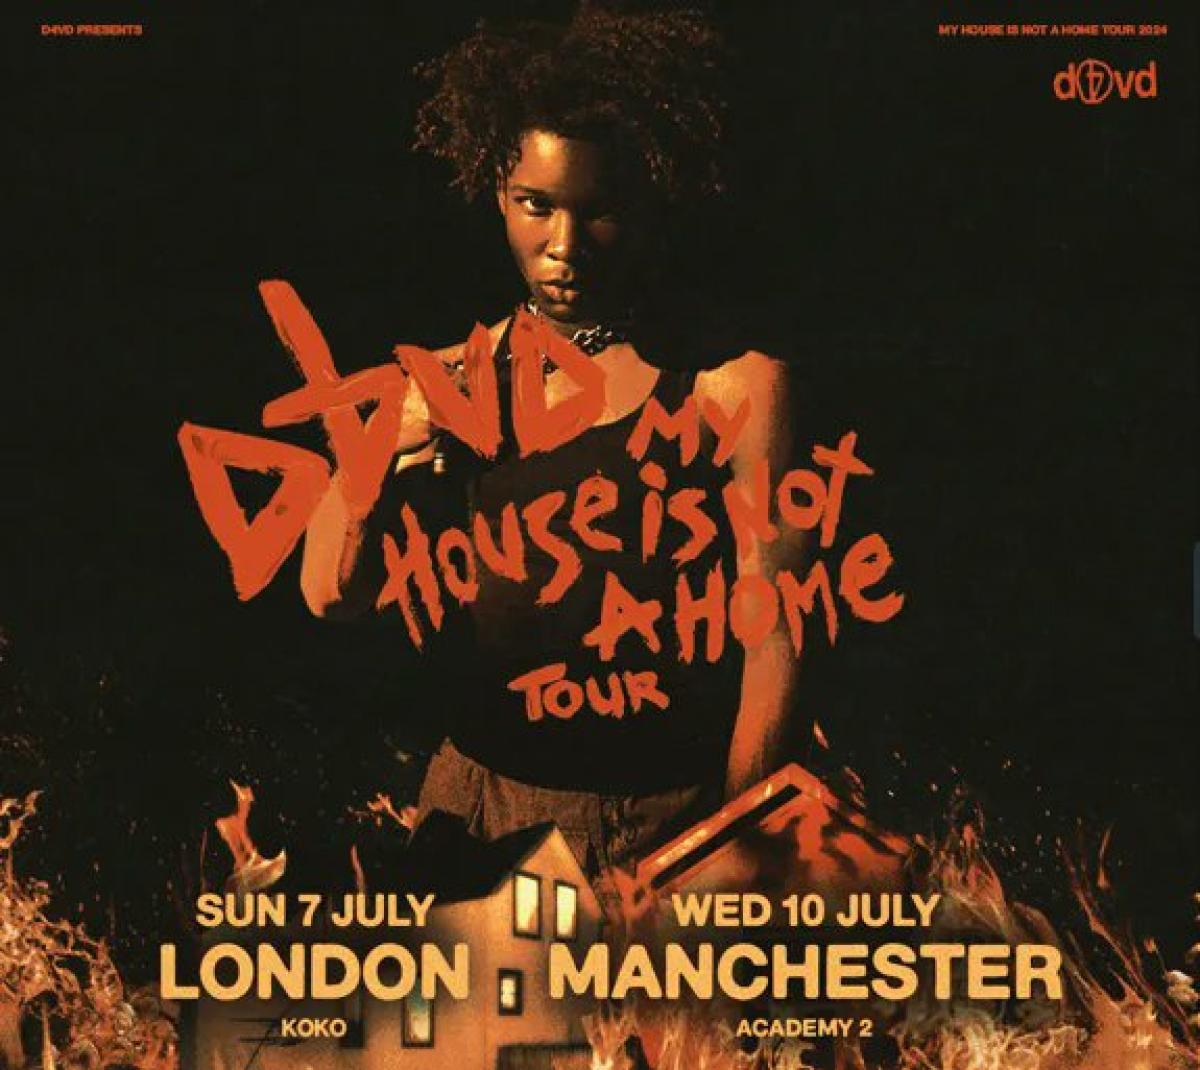 Billets D4vd - My House Is Not A Home Tour (KOKO - Londres)